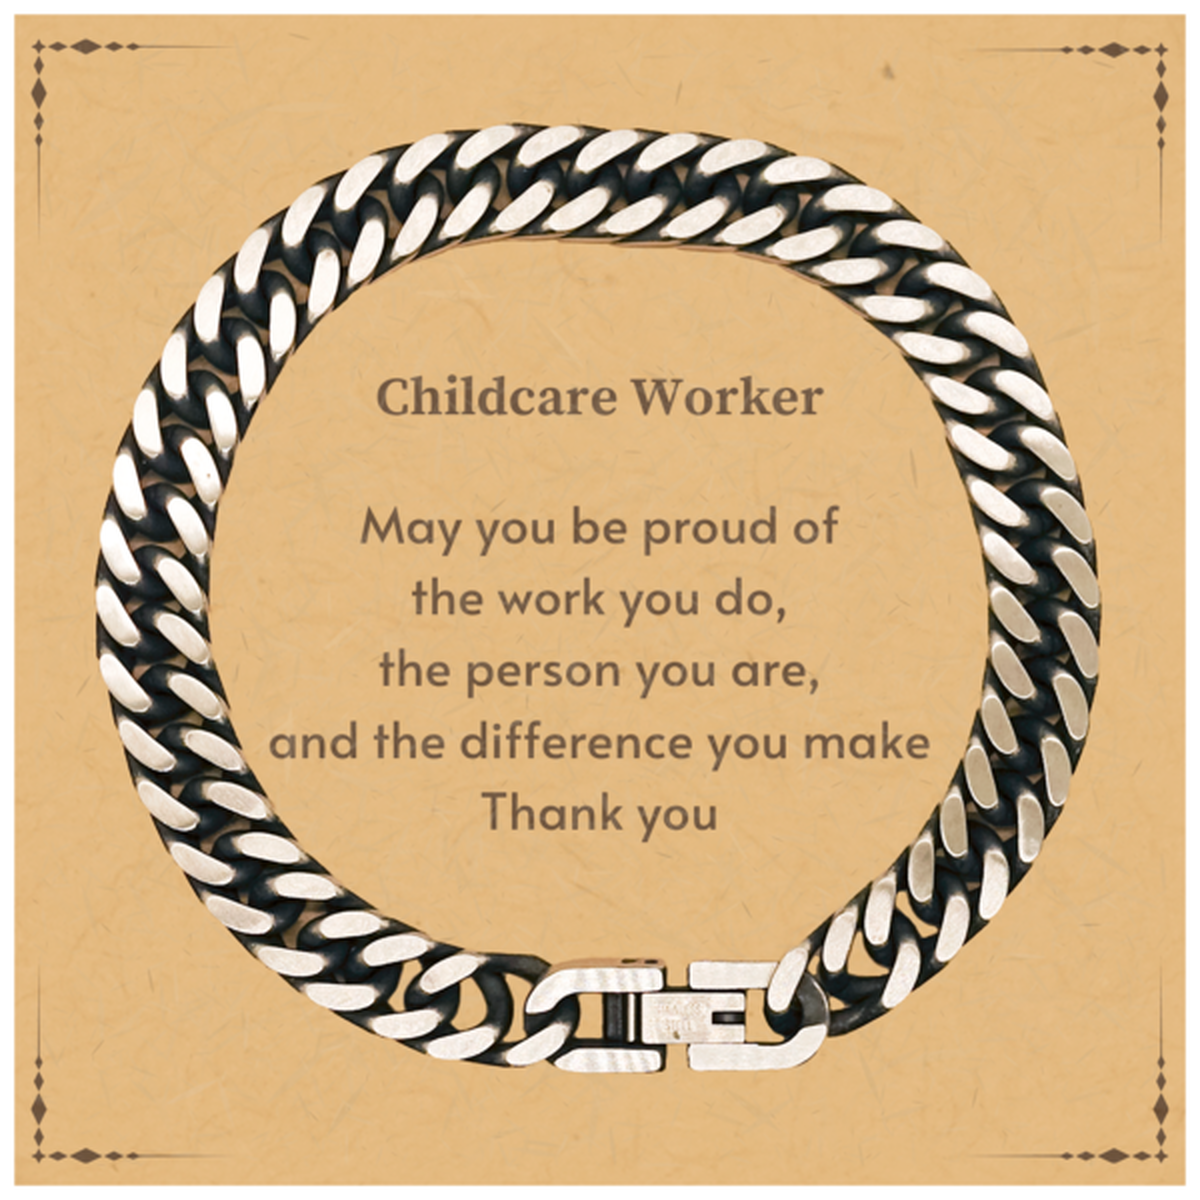 Heartwarming Cuban Link Chain Bracelet Retirement Coworkers Gifts for Childcare Worker, Childcare Worker May You be proud of the work you do, the person you are Gifts for Boss Men Women Friends